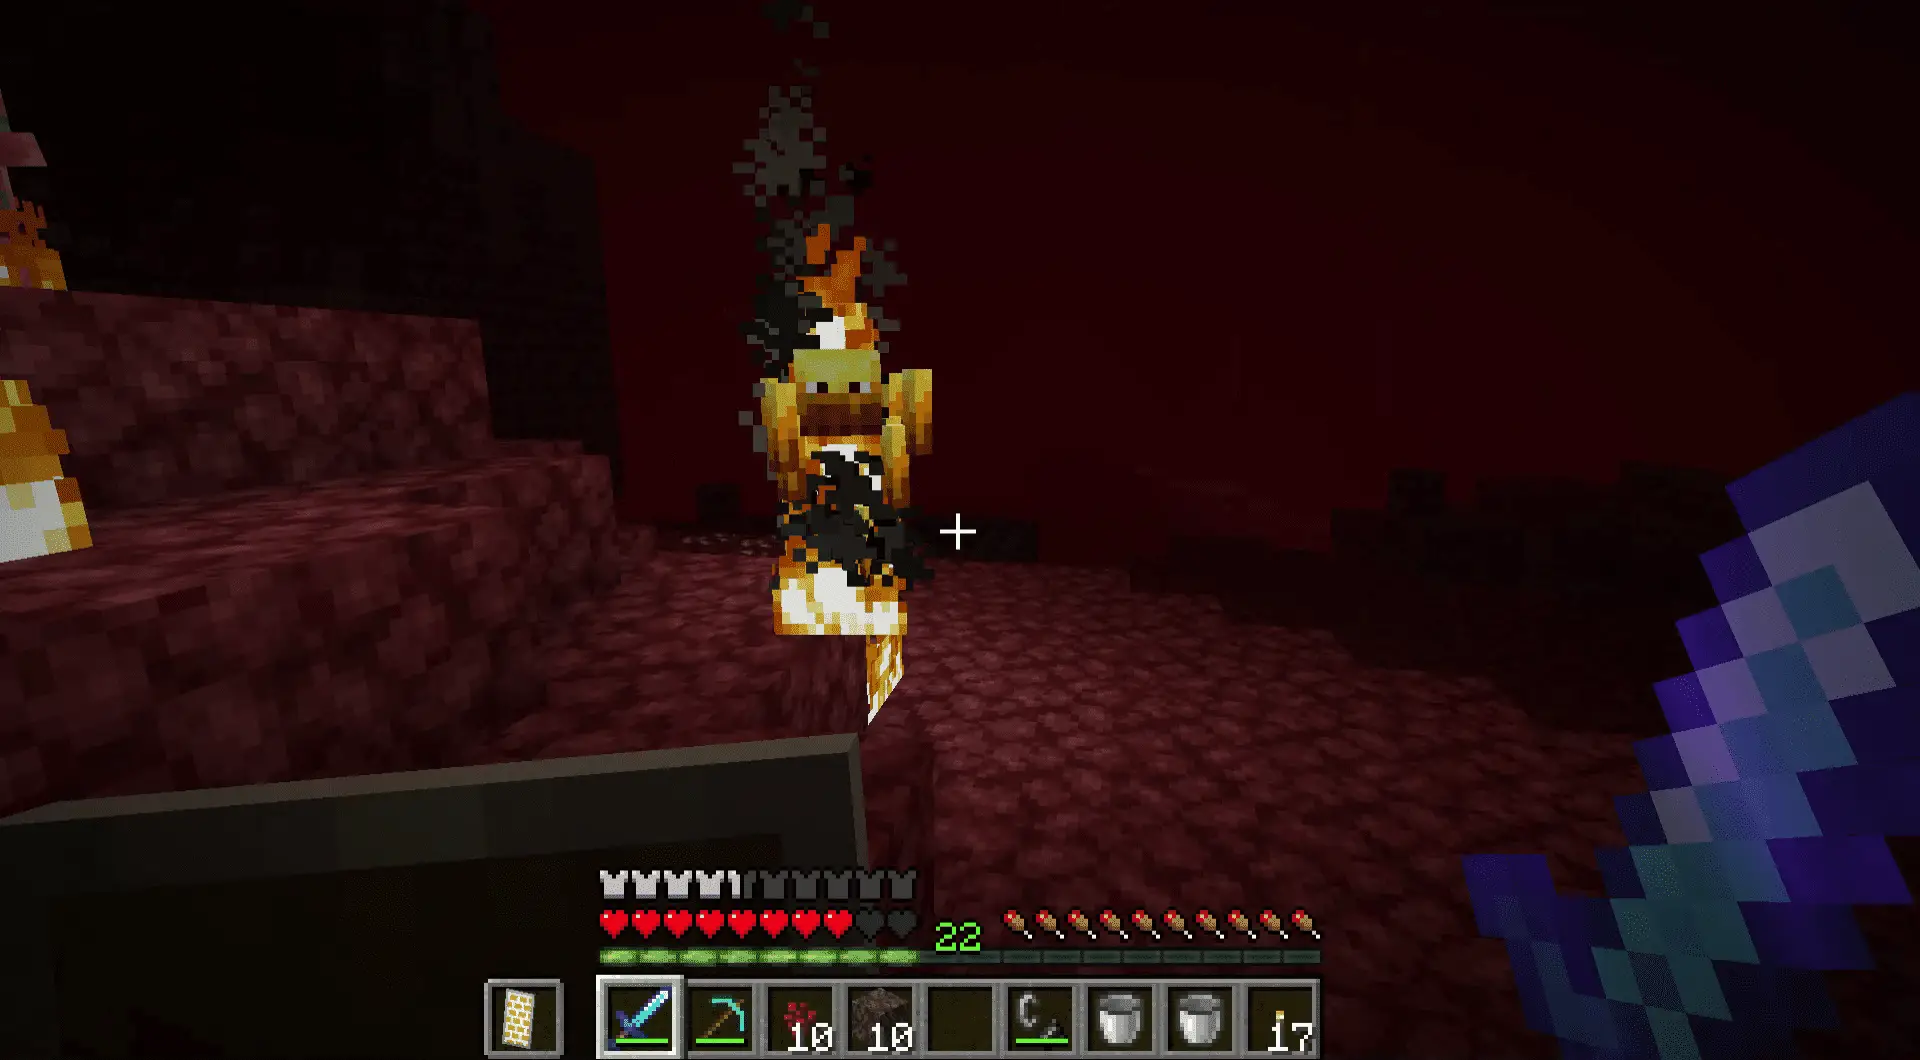 A Blaze in the Nether.